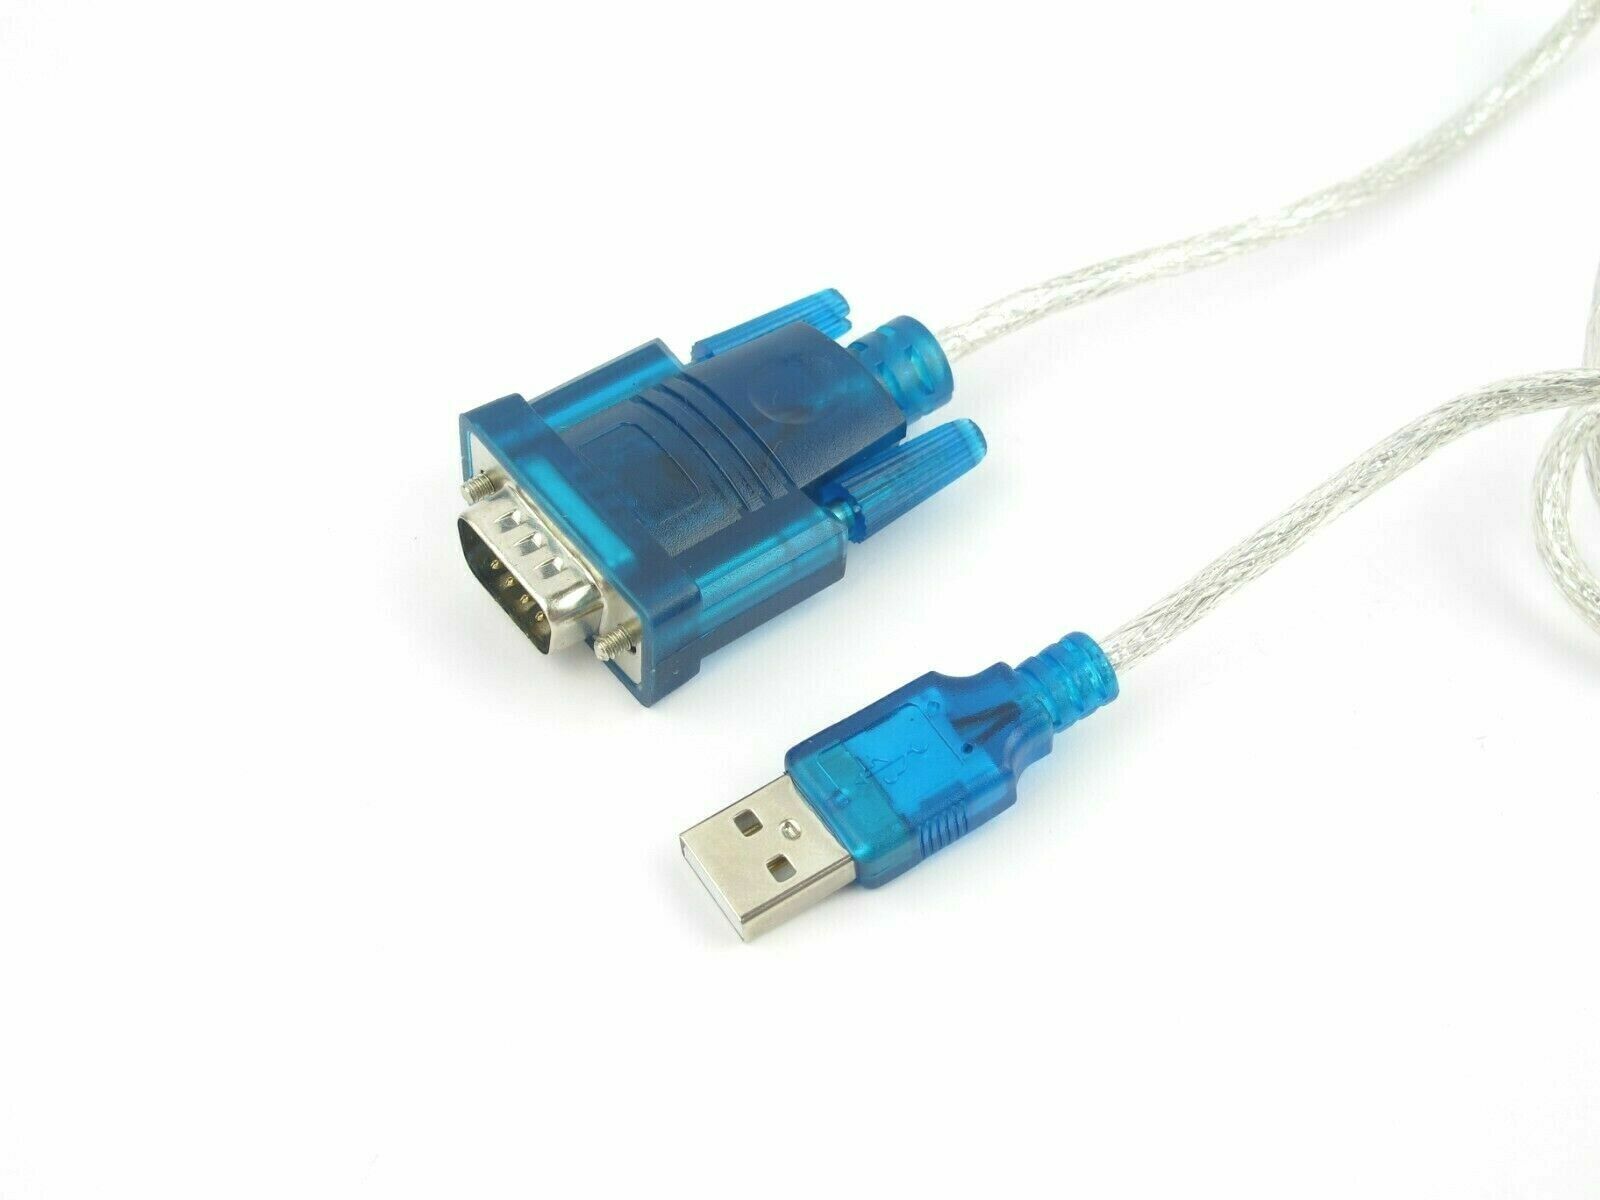 2 Pack USB 2.0 to RS232 Serial 9 Pin 9P DB9 Adapter Converter Cable Cord New Unbranded Does not apply - фотография #2